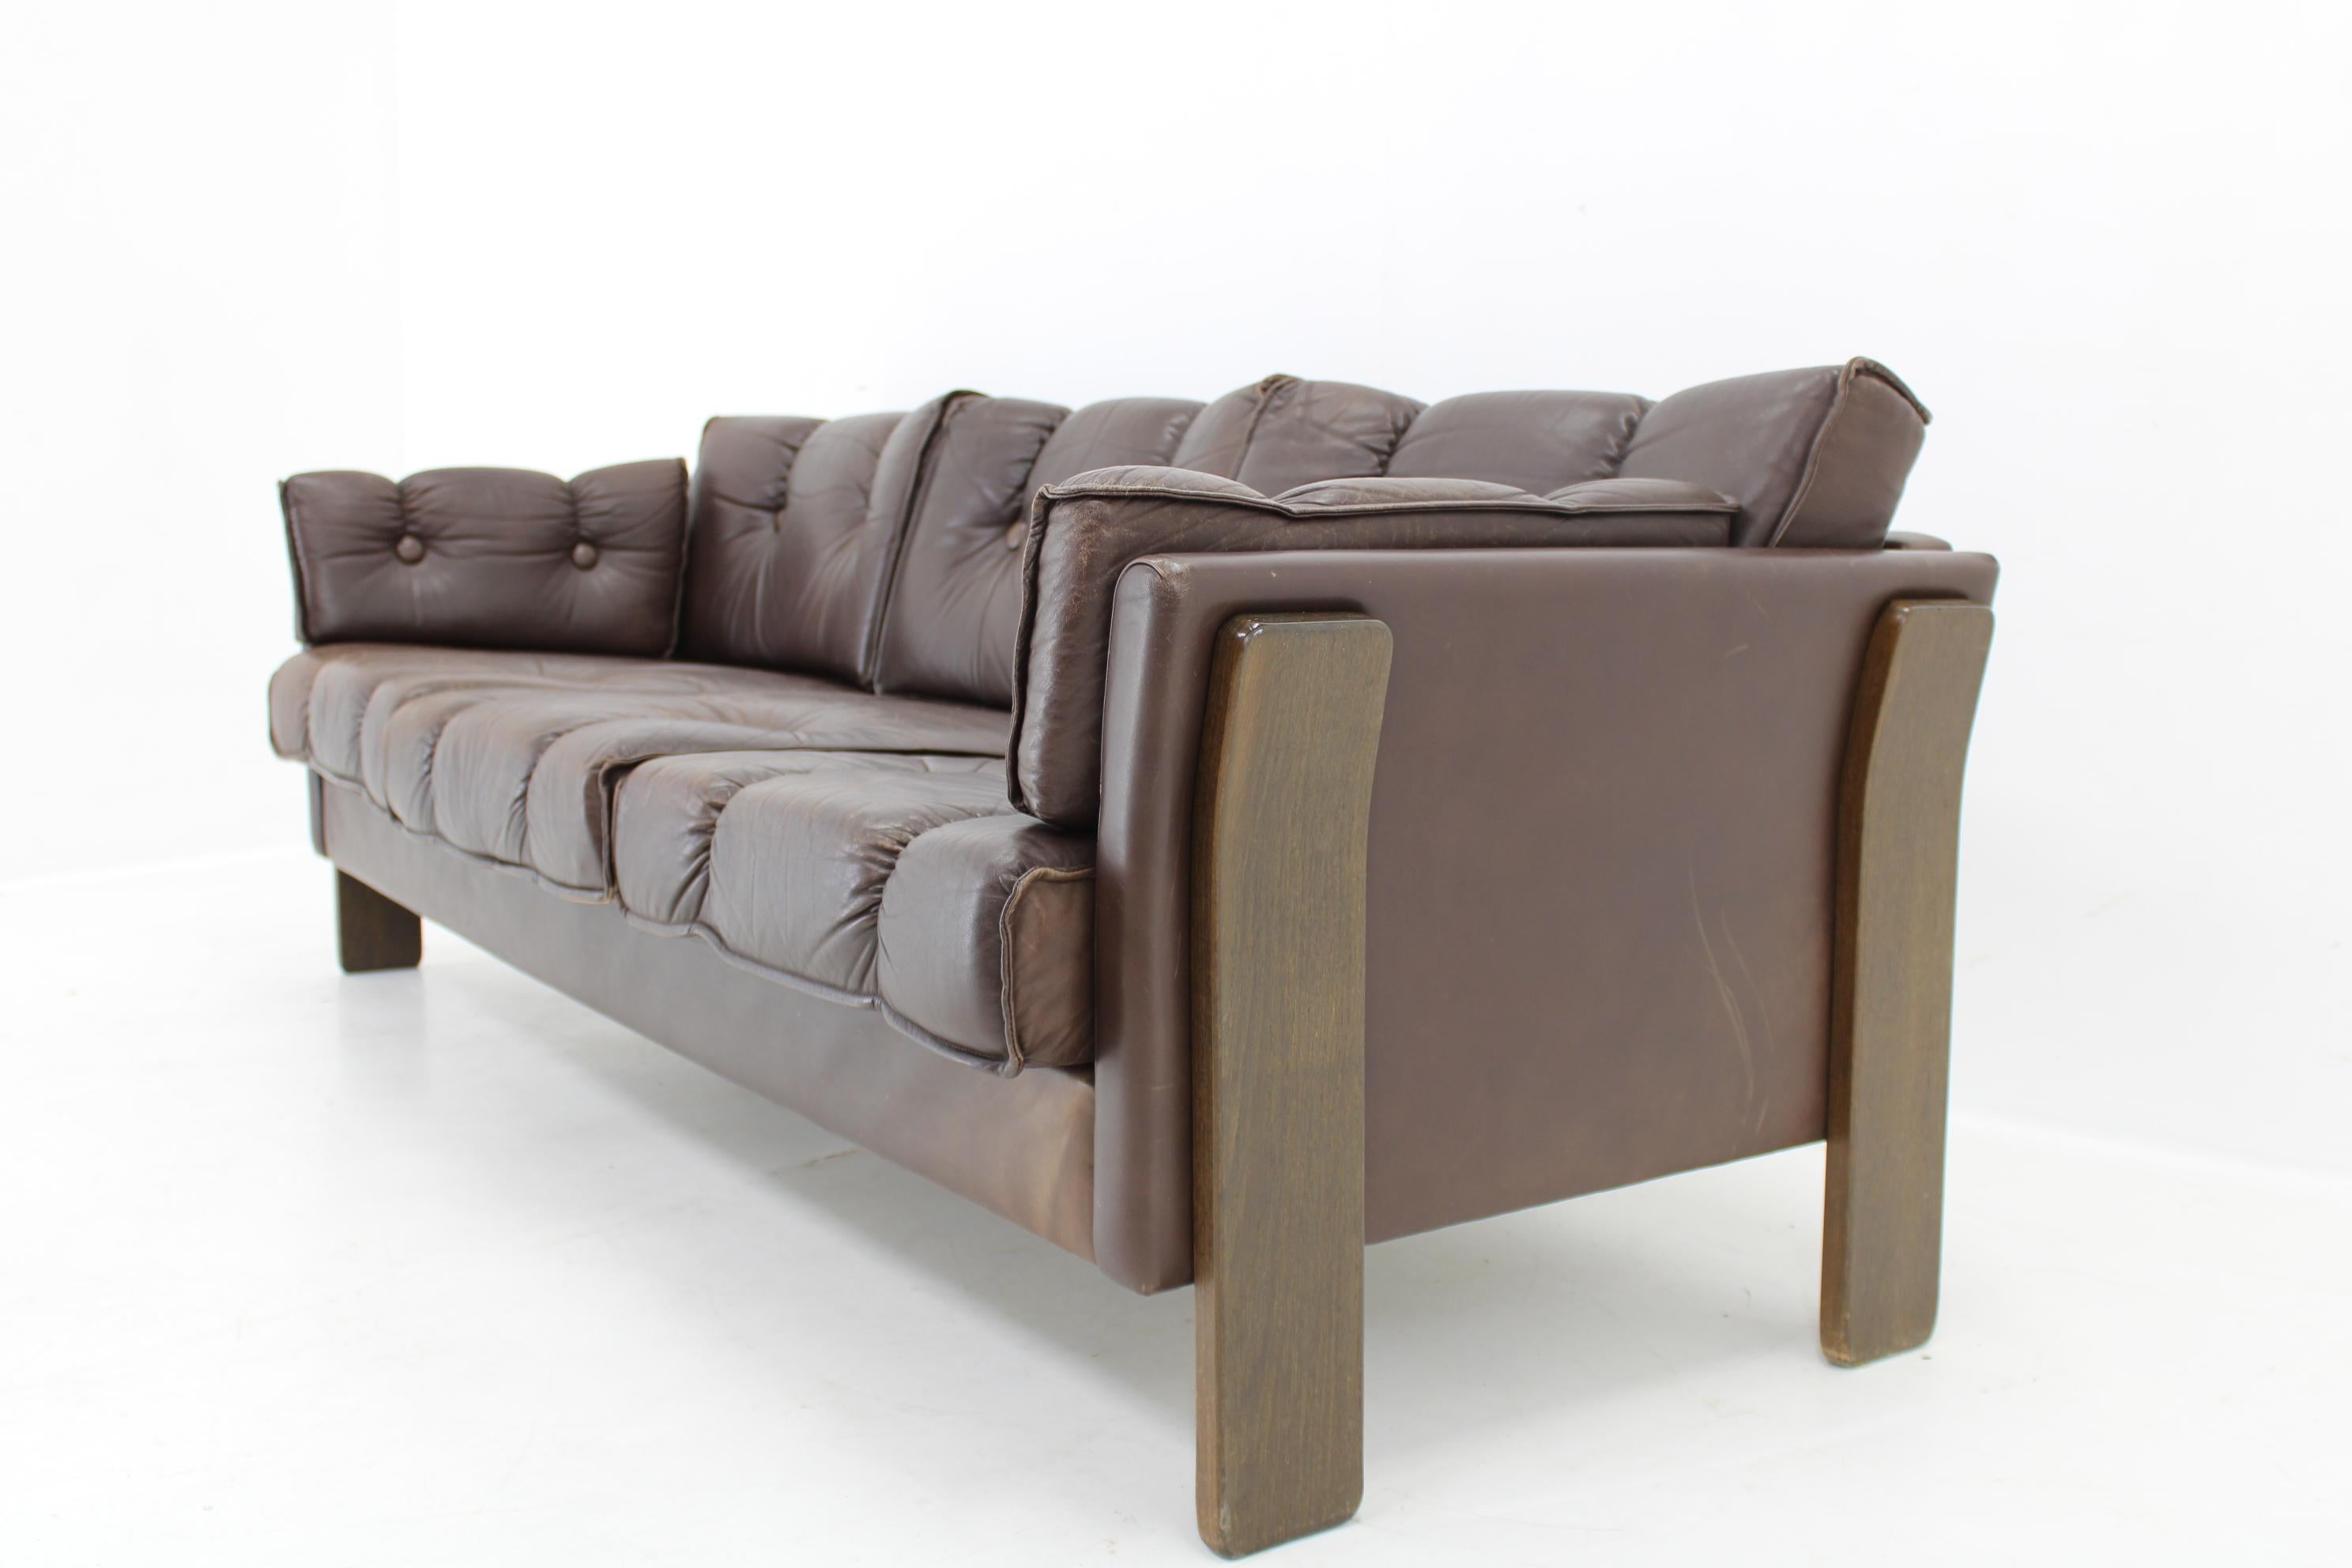 Danish 1970s Brown Leather 3-Seater Sofa, Denmark For Sale